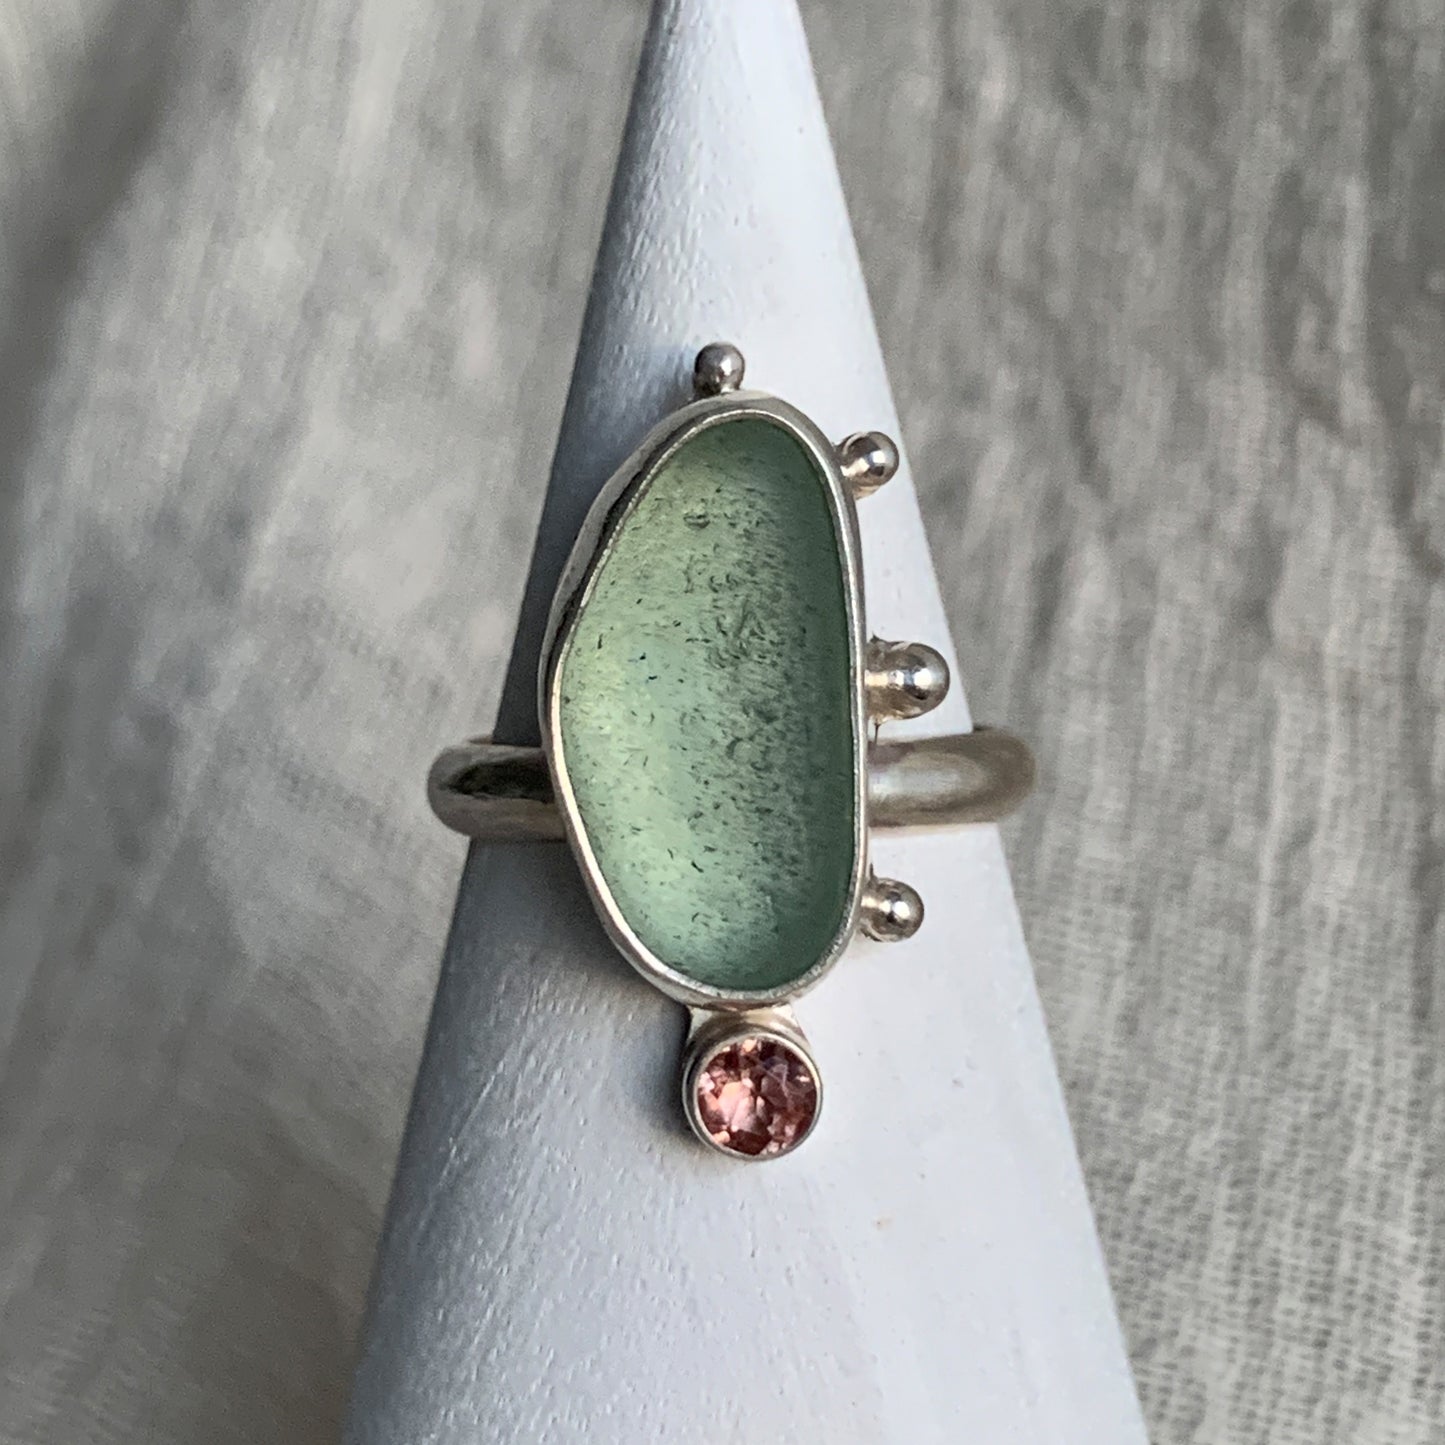 Seaglass Ring No. 2 • Size 8.5